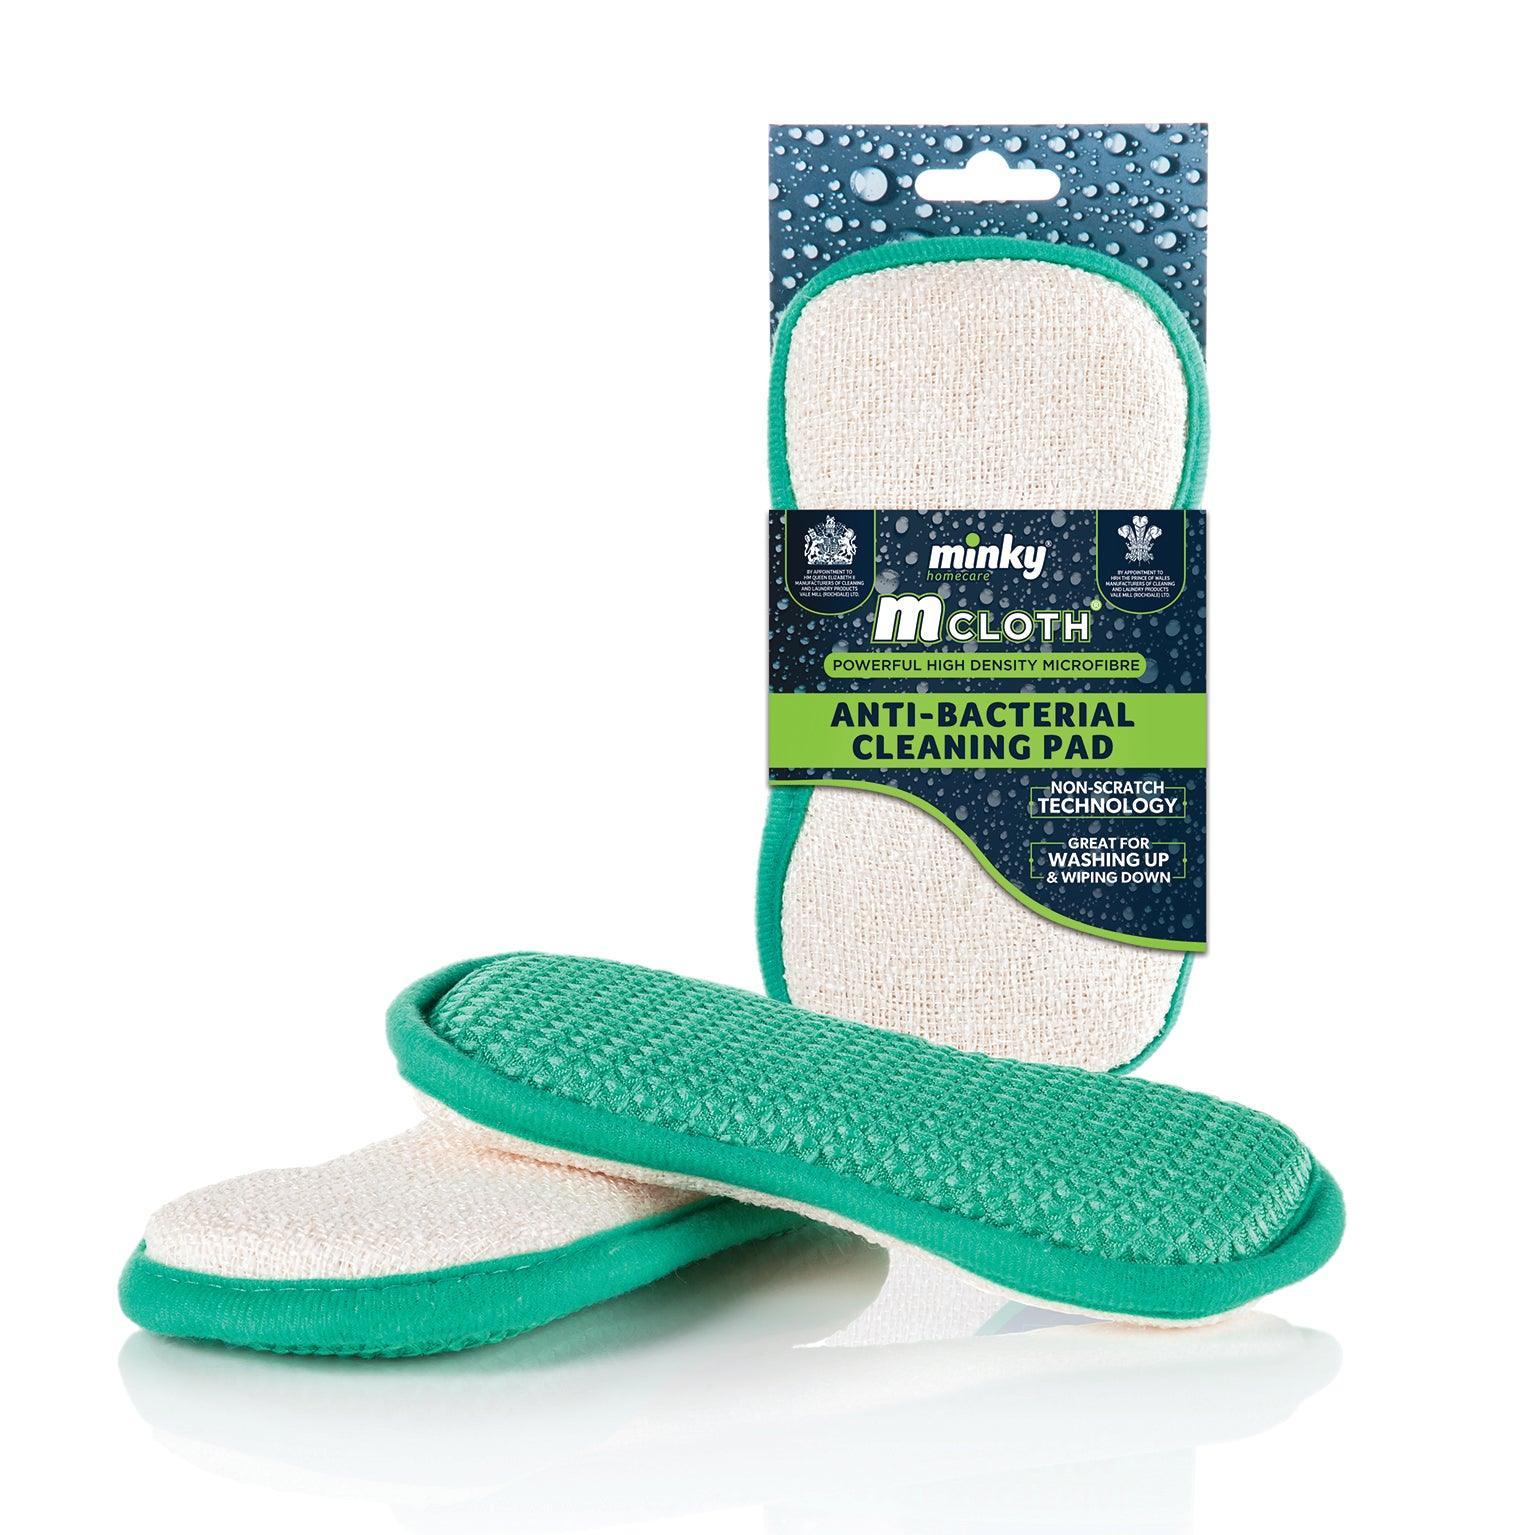 Minky M Cloth Non-Scratch Anti-Bacterial Cleaning Pad - Choice Stores